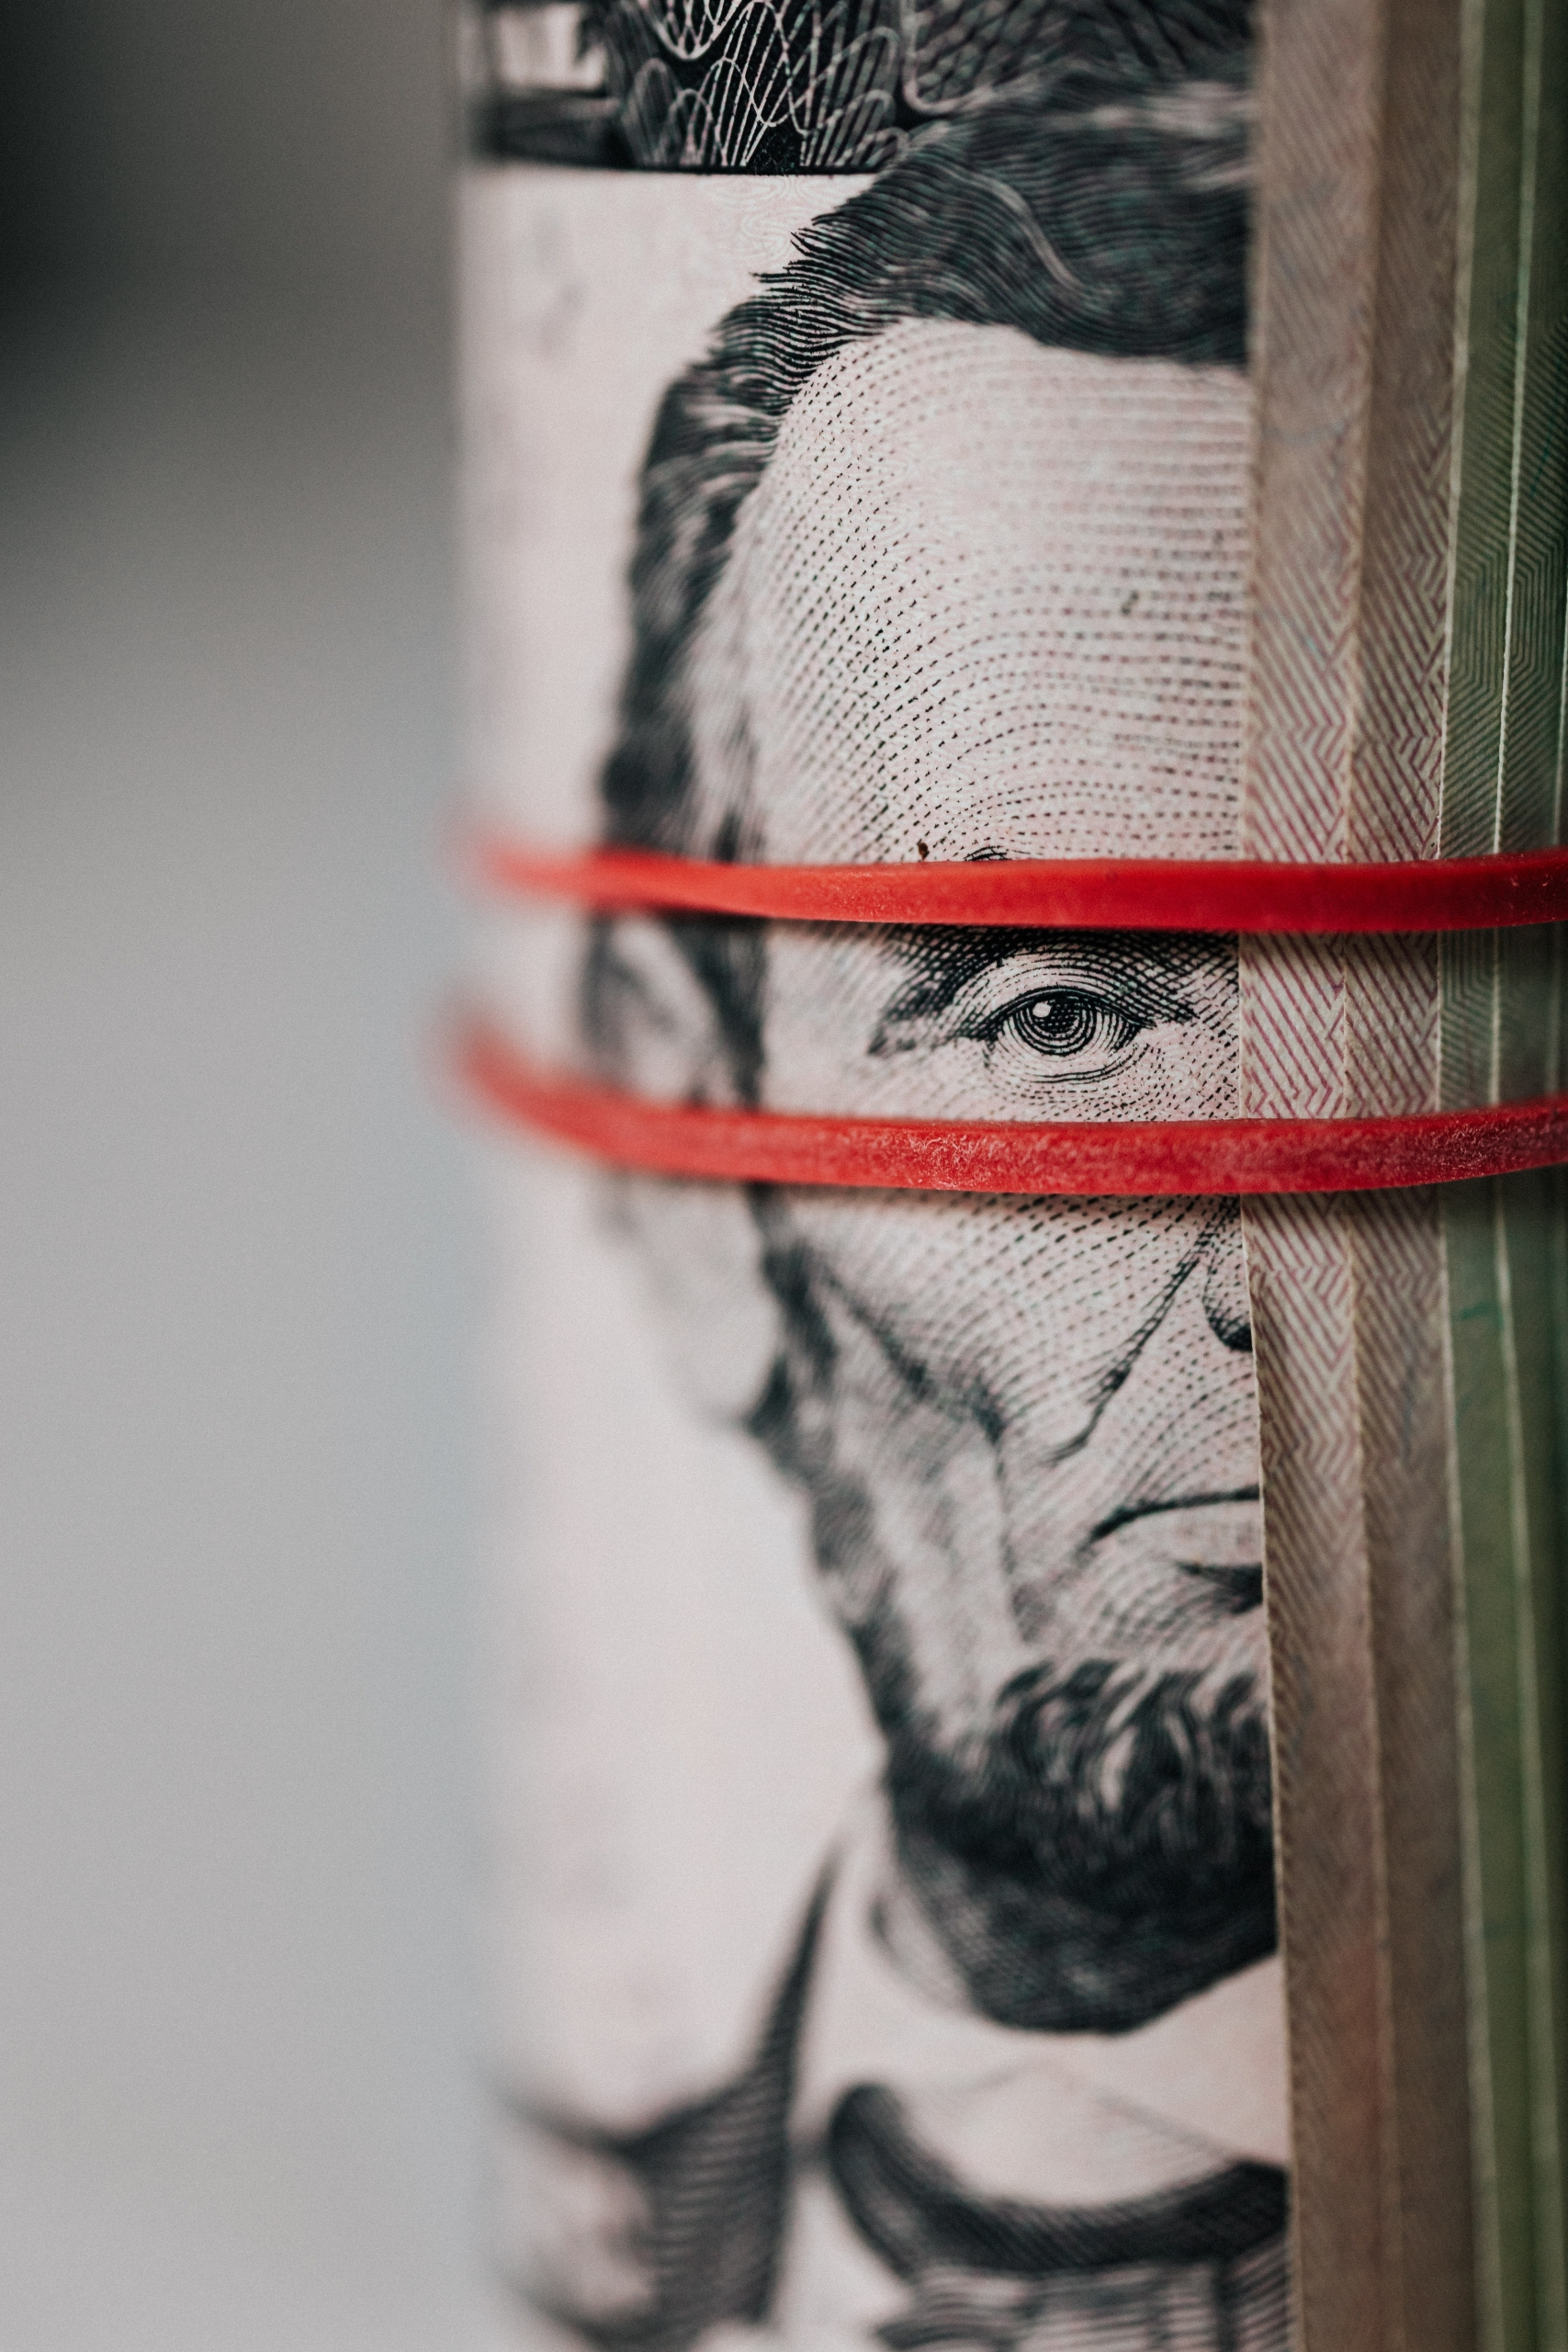 rolled money bill with Lincoln's face centered and a red rubber band wrapped above and below Lincoln's eye